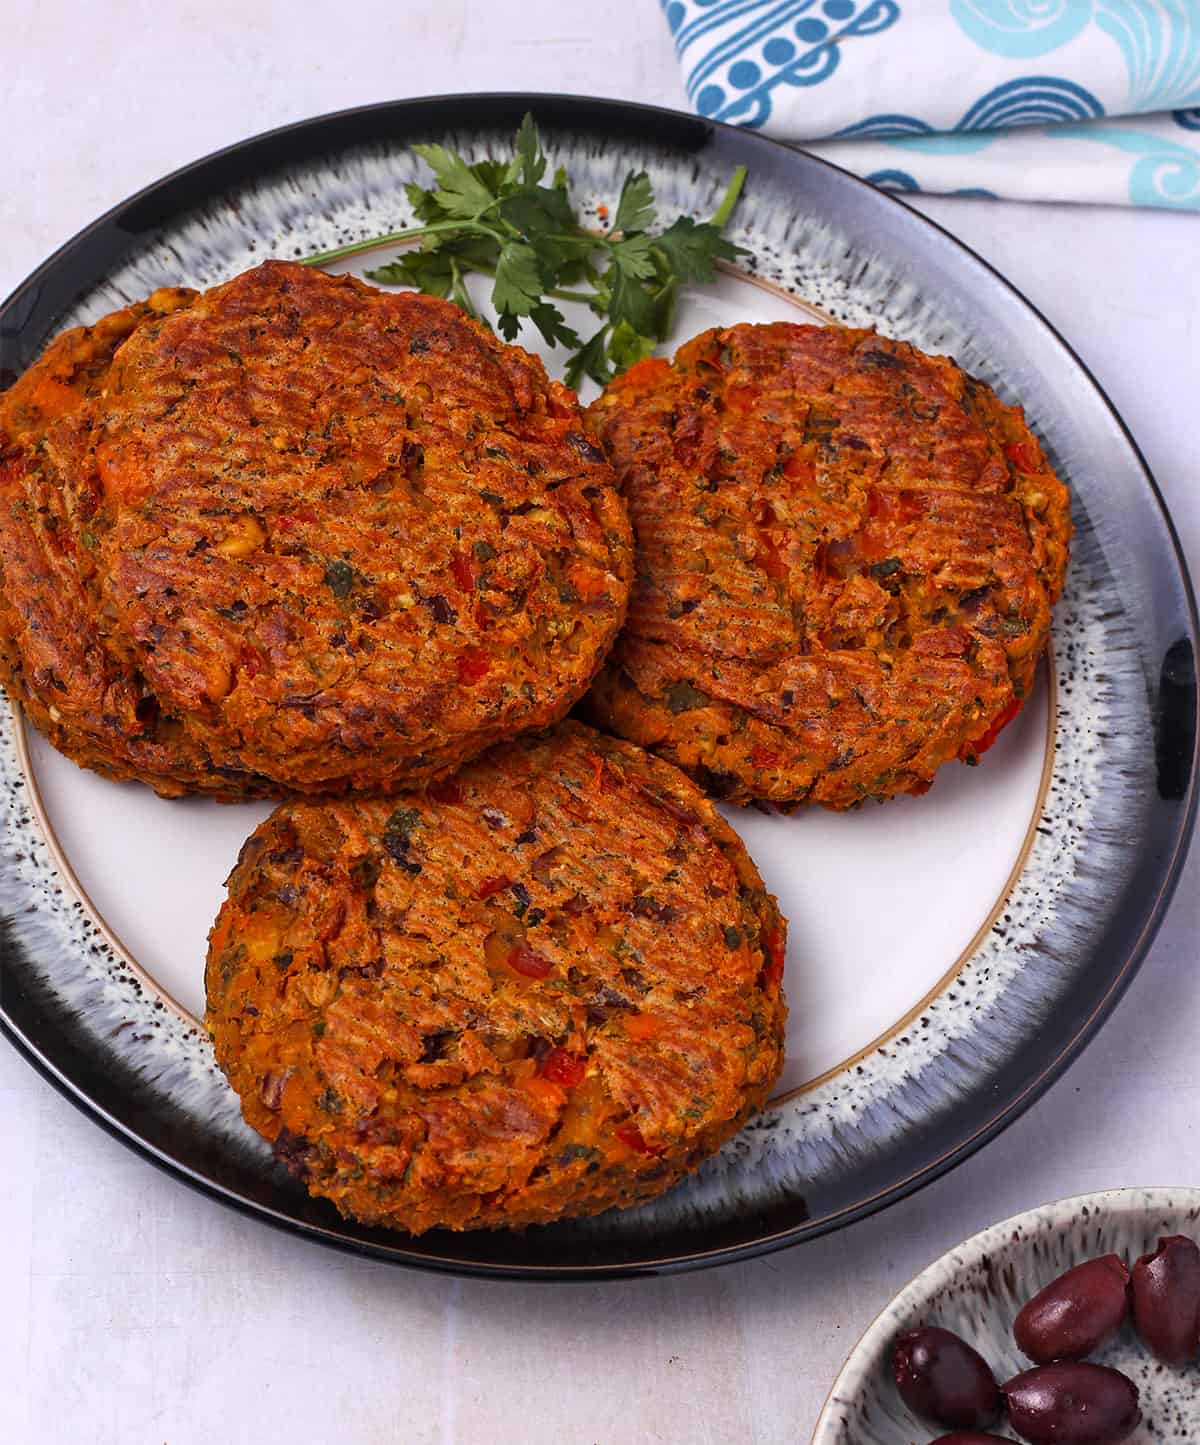 A plate with four sweet potato and chickpea burger patties.